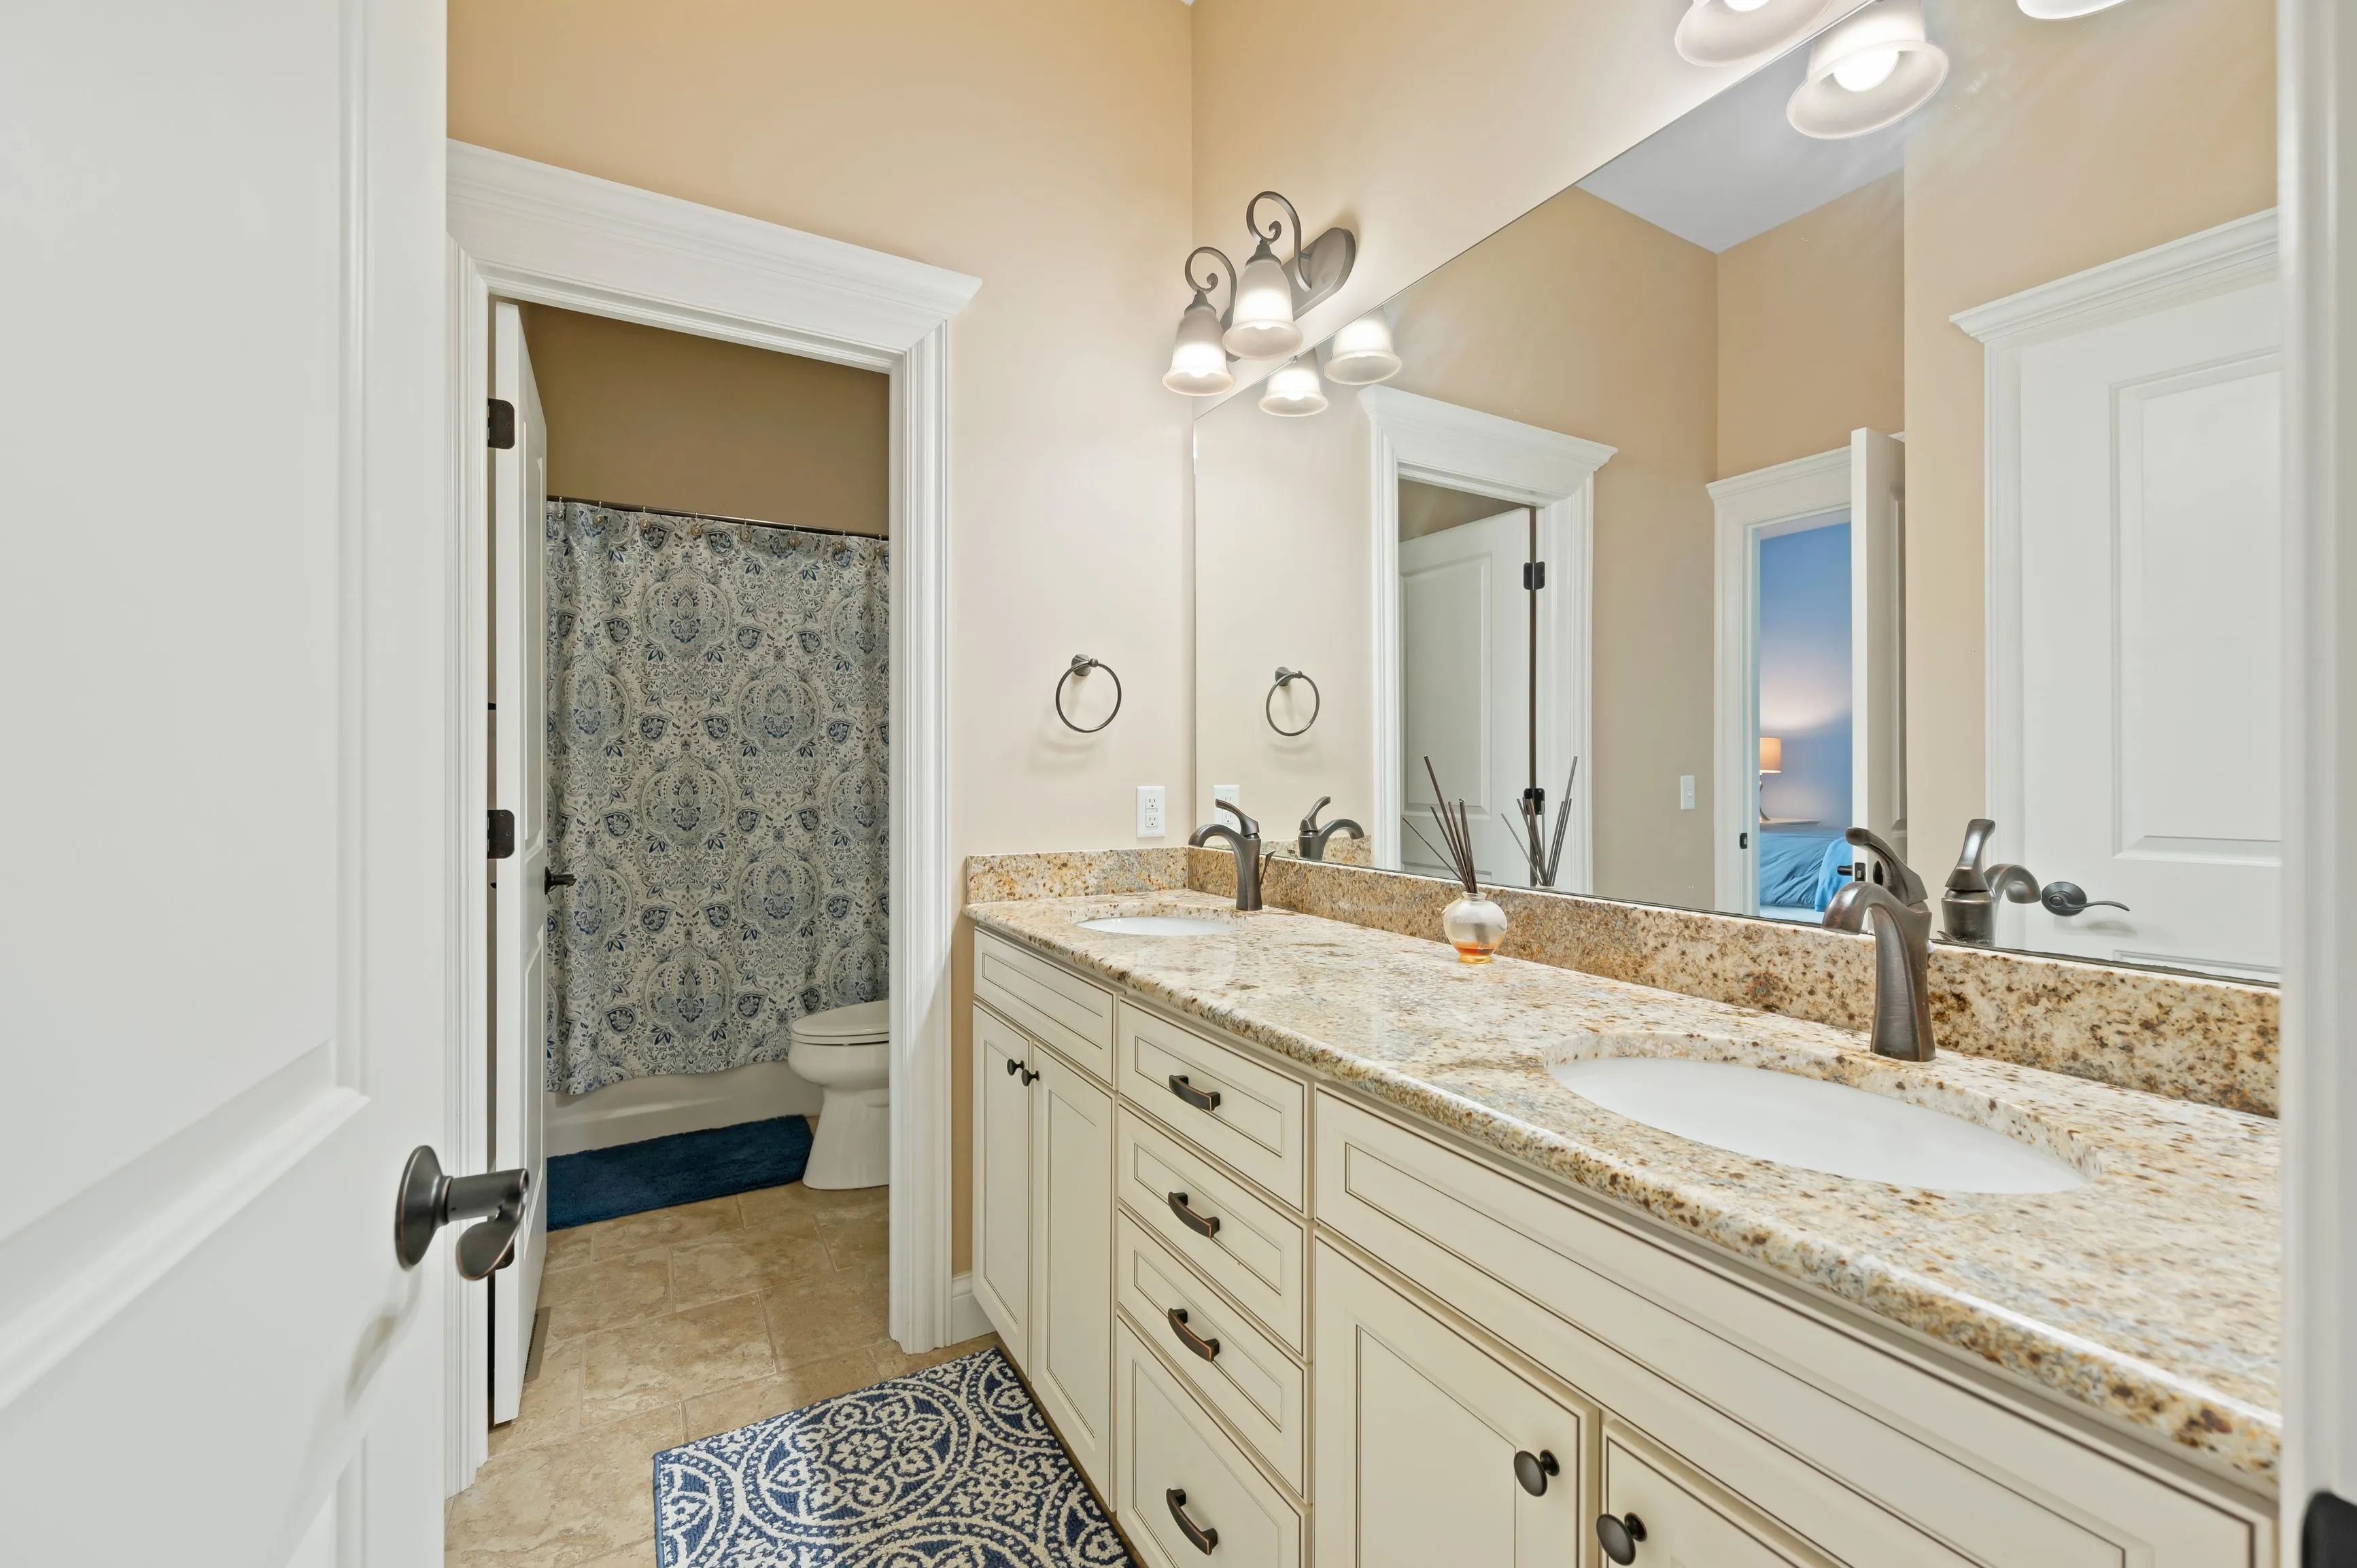 Spacious bathroom interior with double vanity sink, large mirror, and a separate toilet area with a patterned shower curtain.